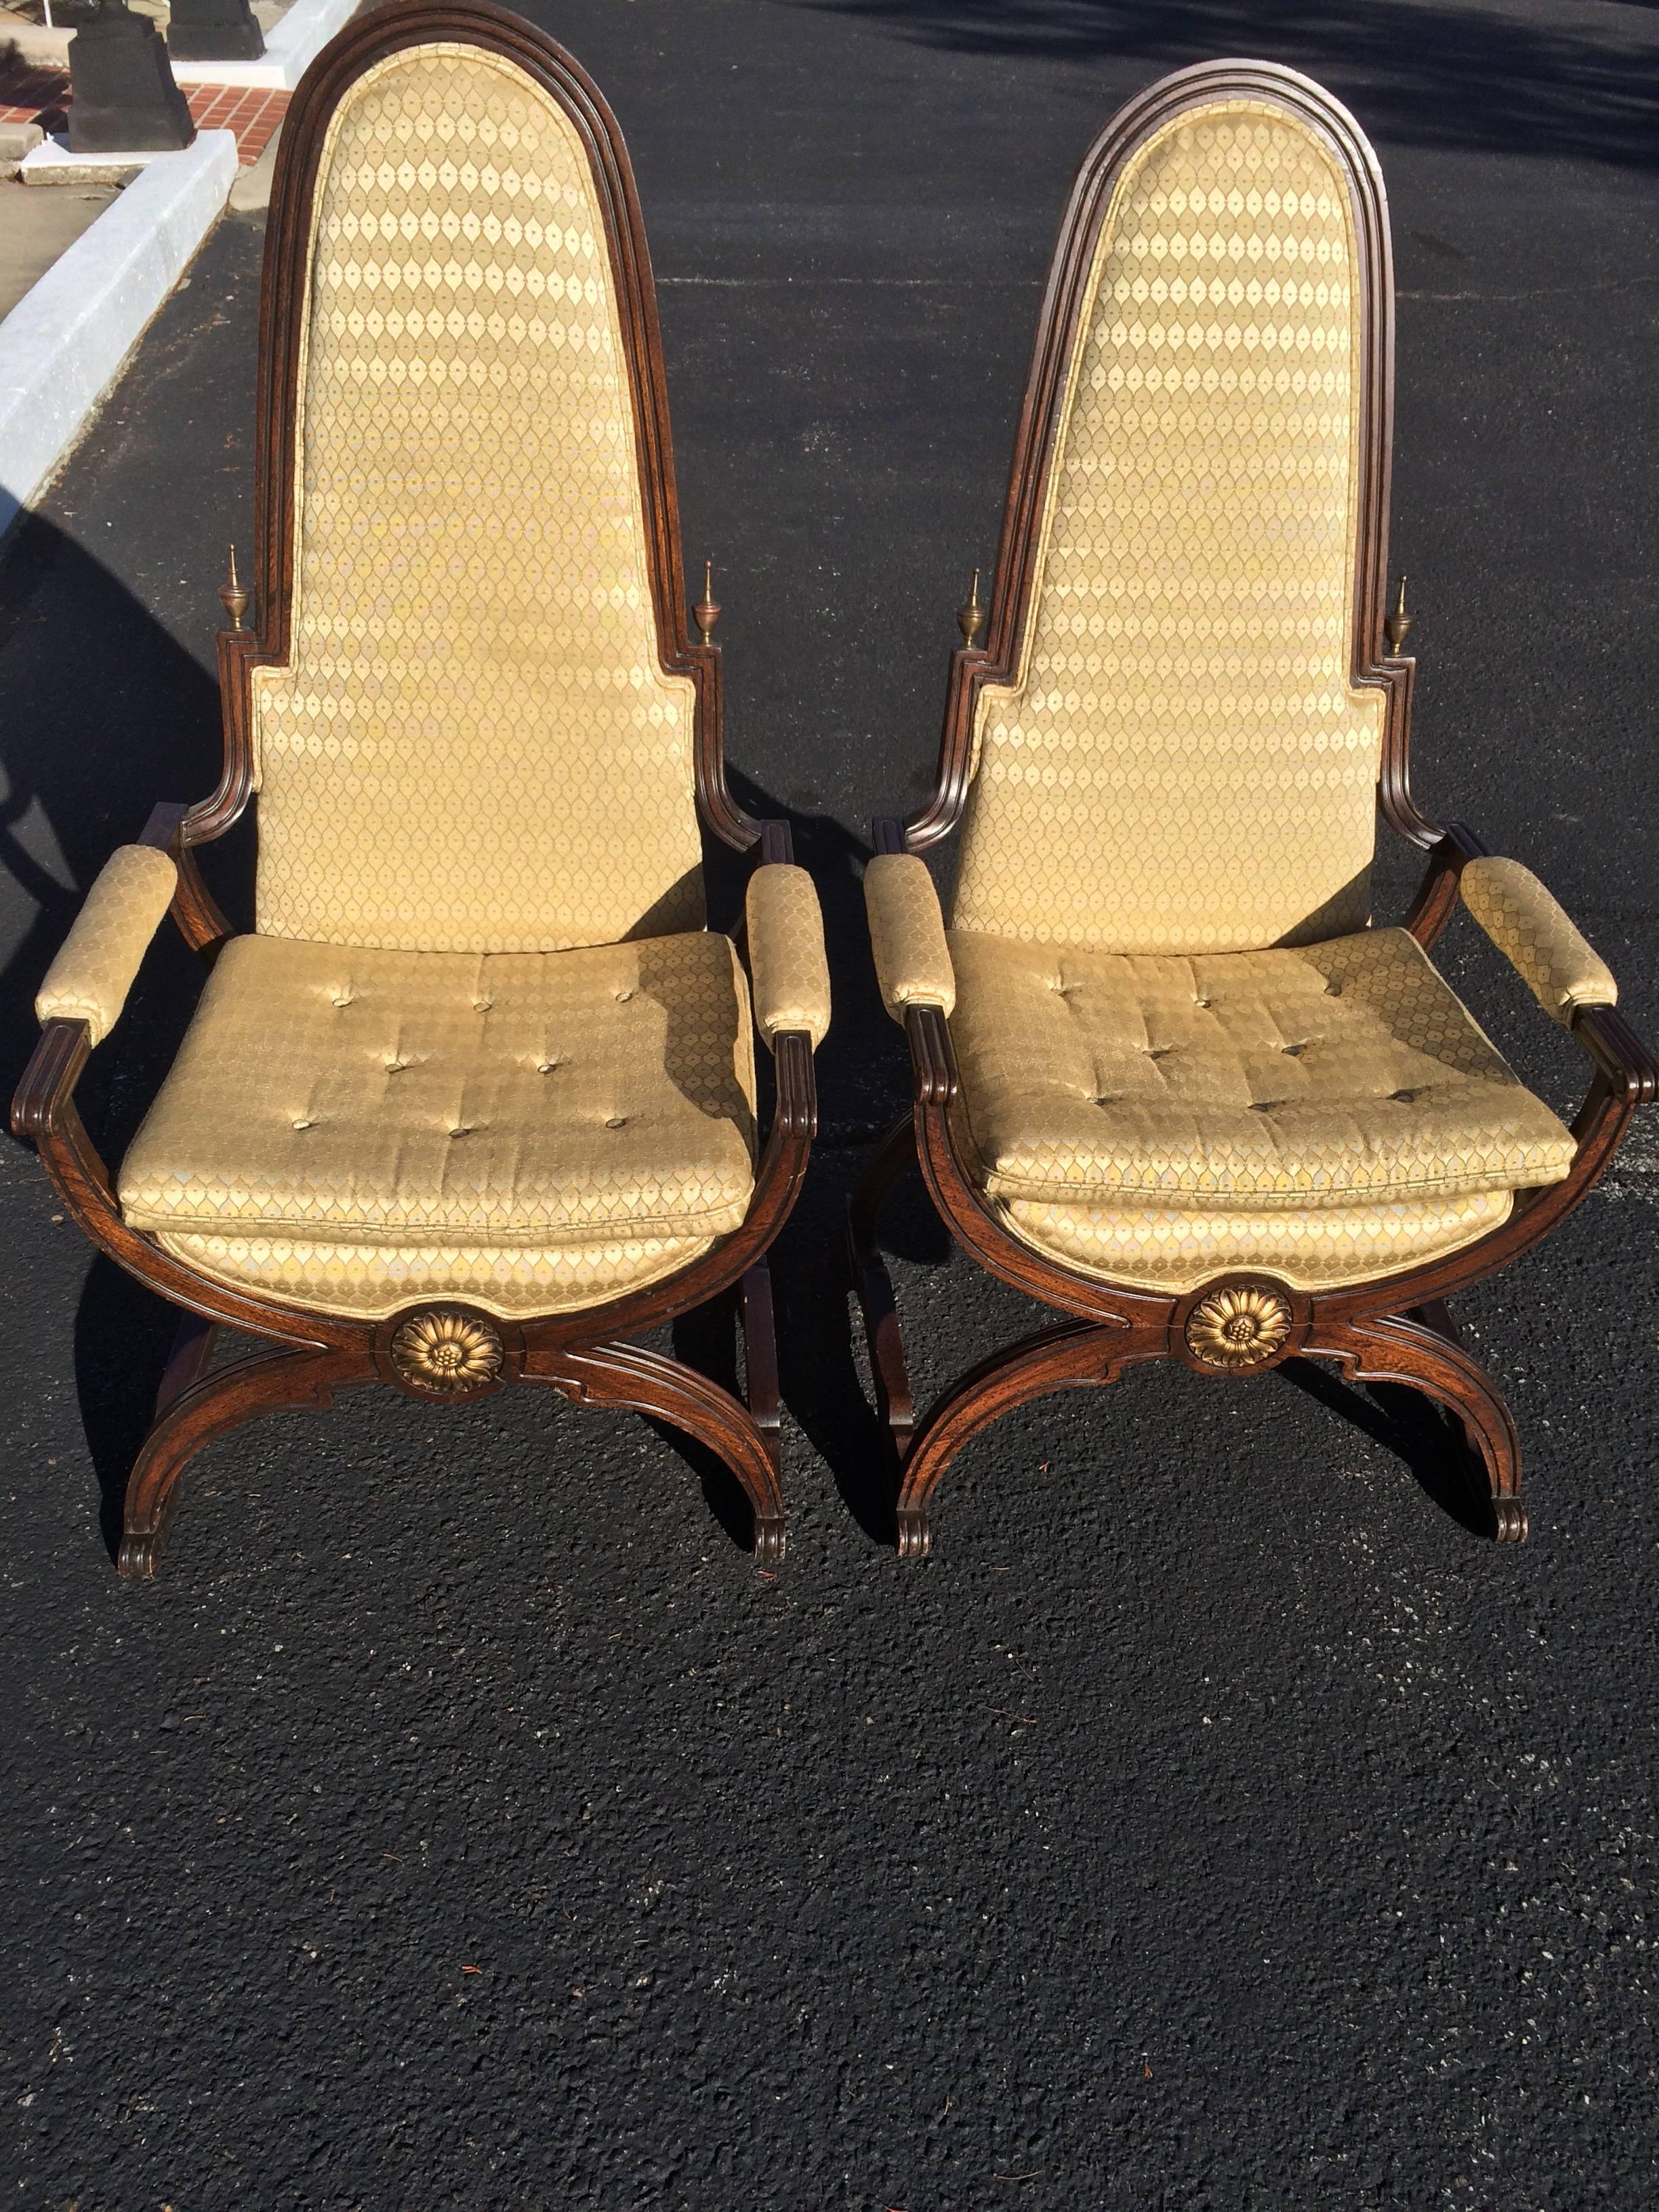 hollywood regency chairs